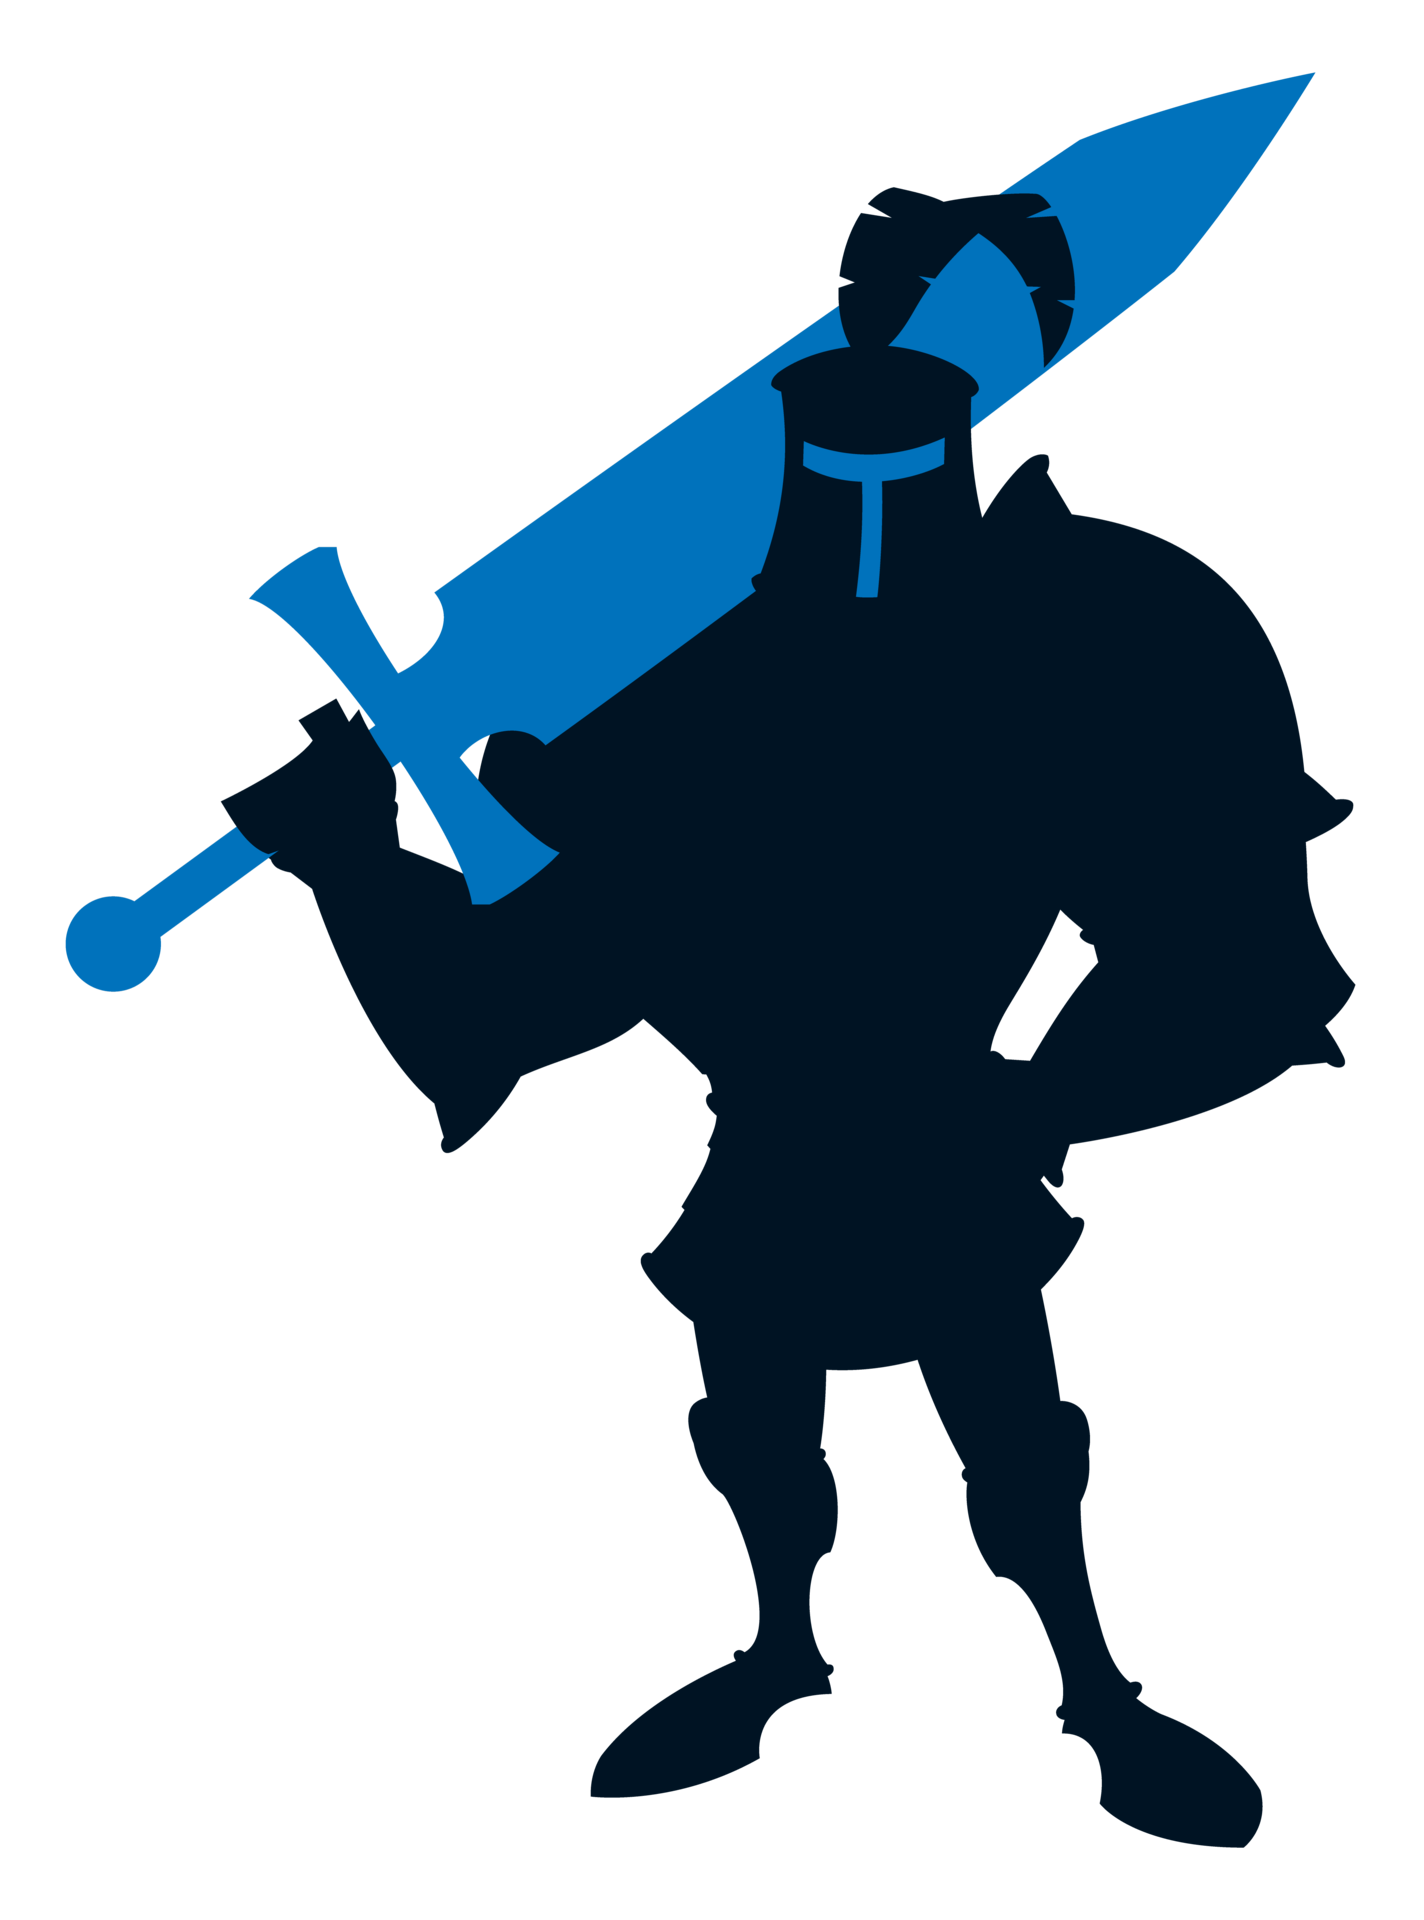 knight silhouette png